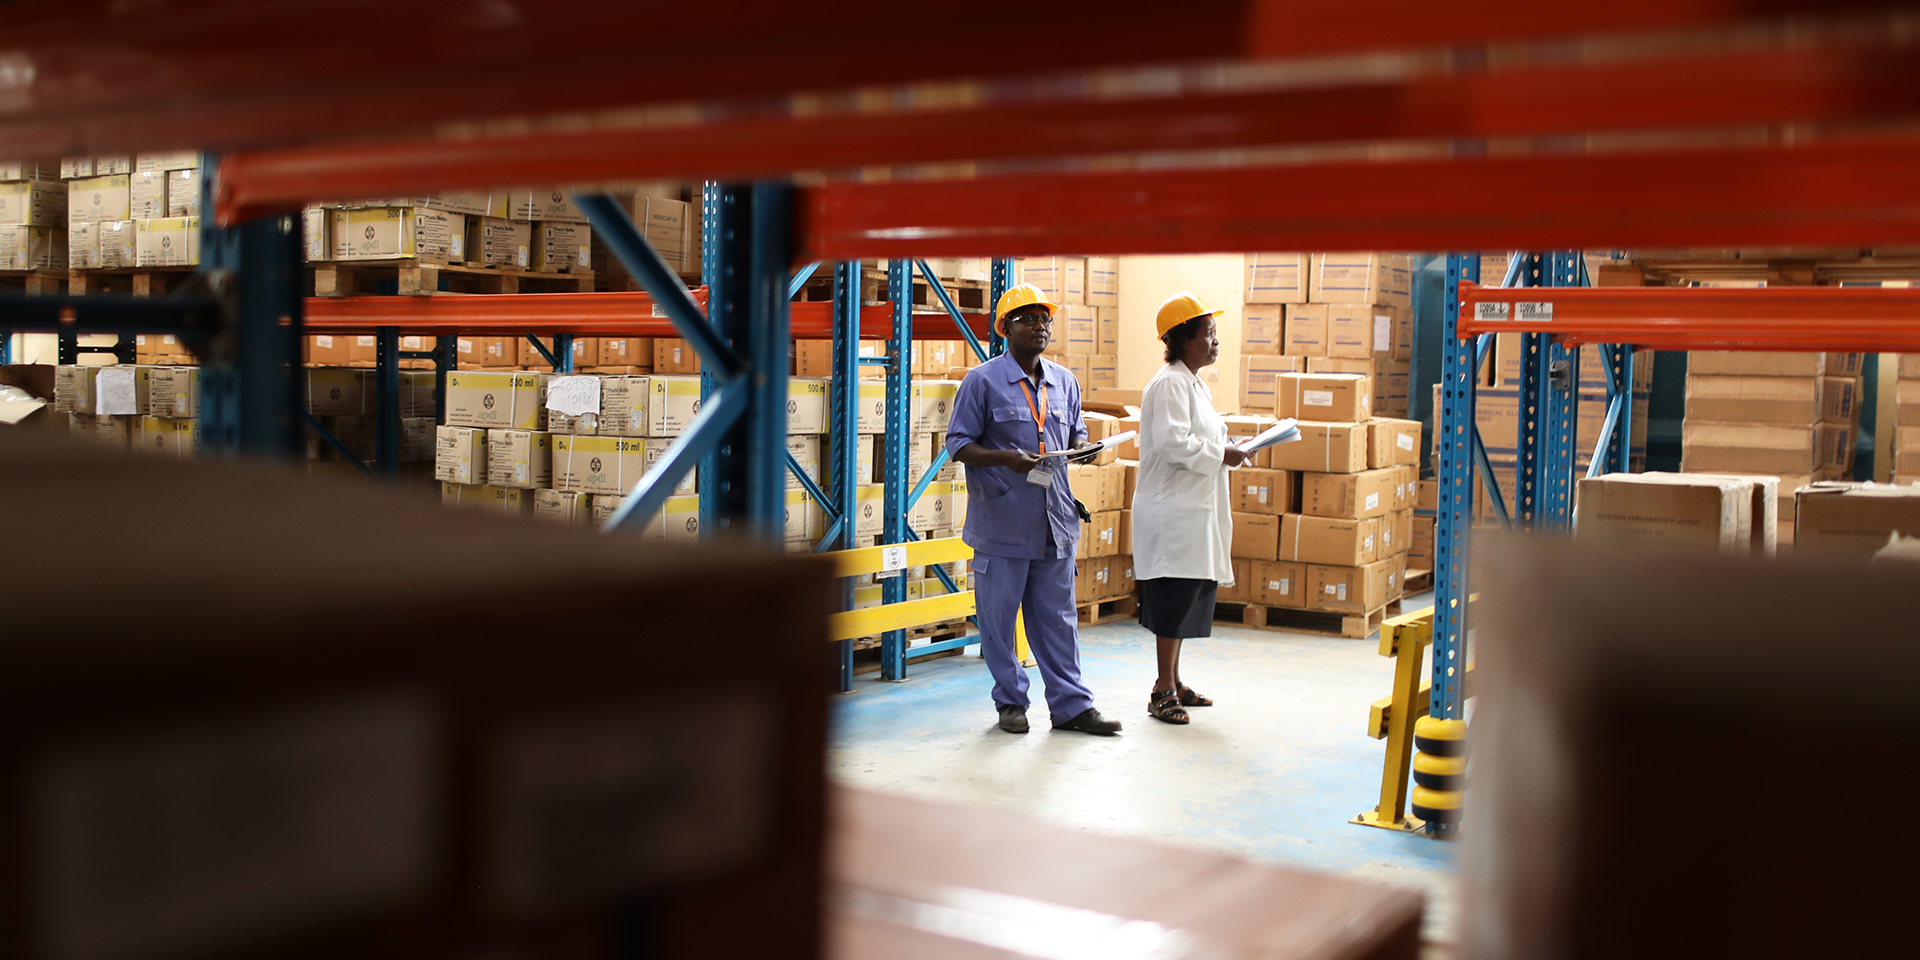 Image of two workers with hard hats standing in a warehouse filled with boxes.